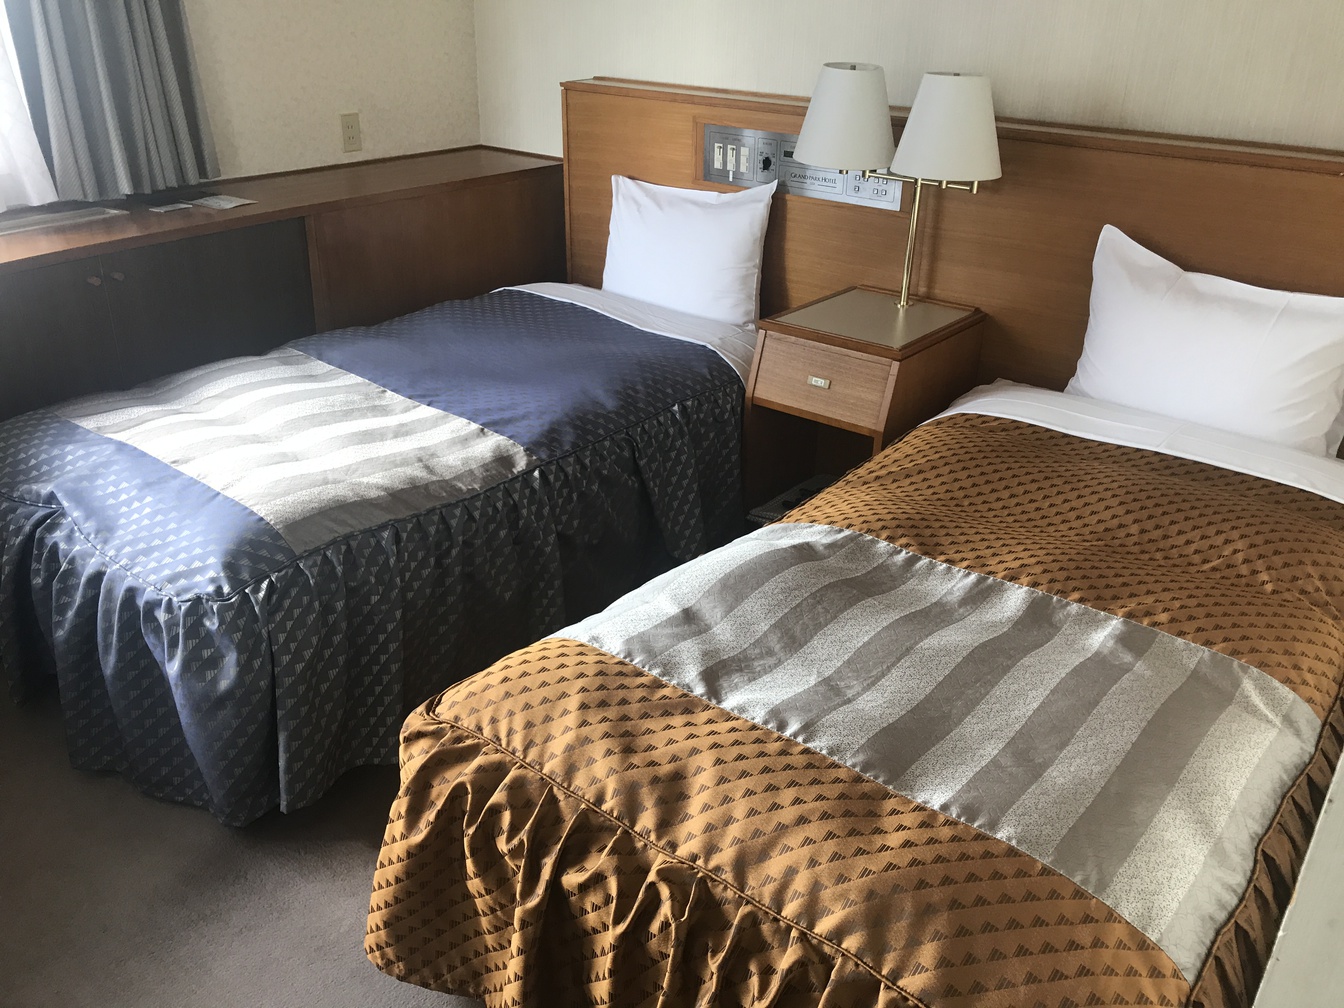 Goi Park Hotel Ideally located in the Ichihara area, Goi Park Hotel promises a relaxing and wonderful visit. Both business travelers and tourists can enjoy the propertys facilities and services. Laundromat, laundry